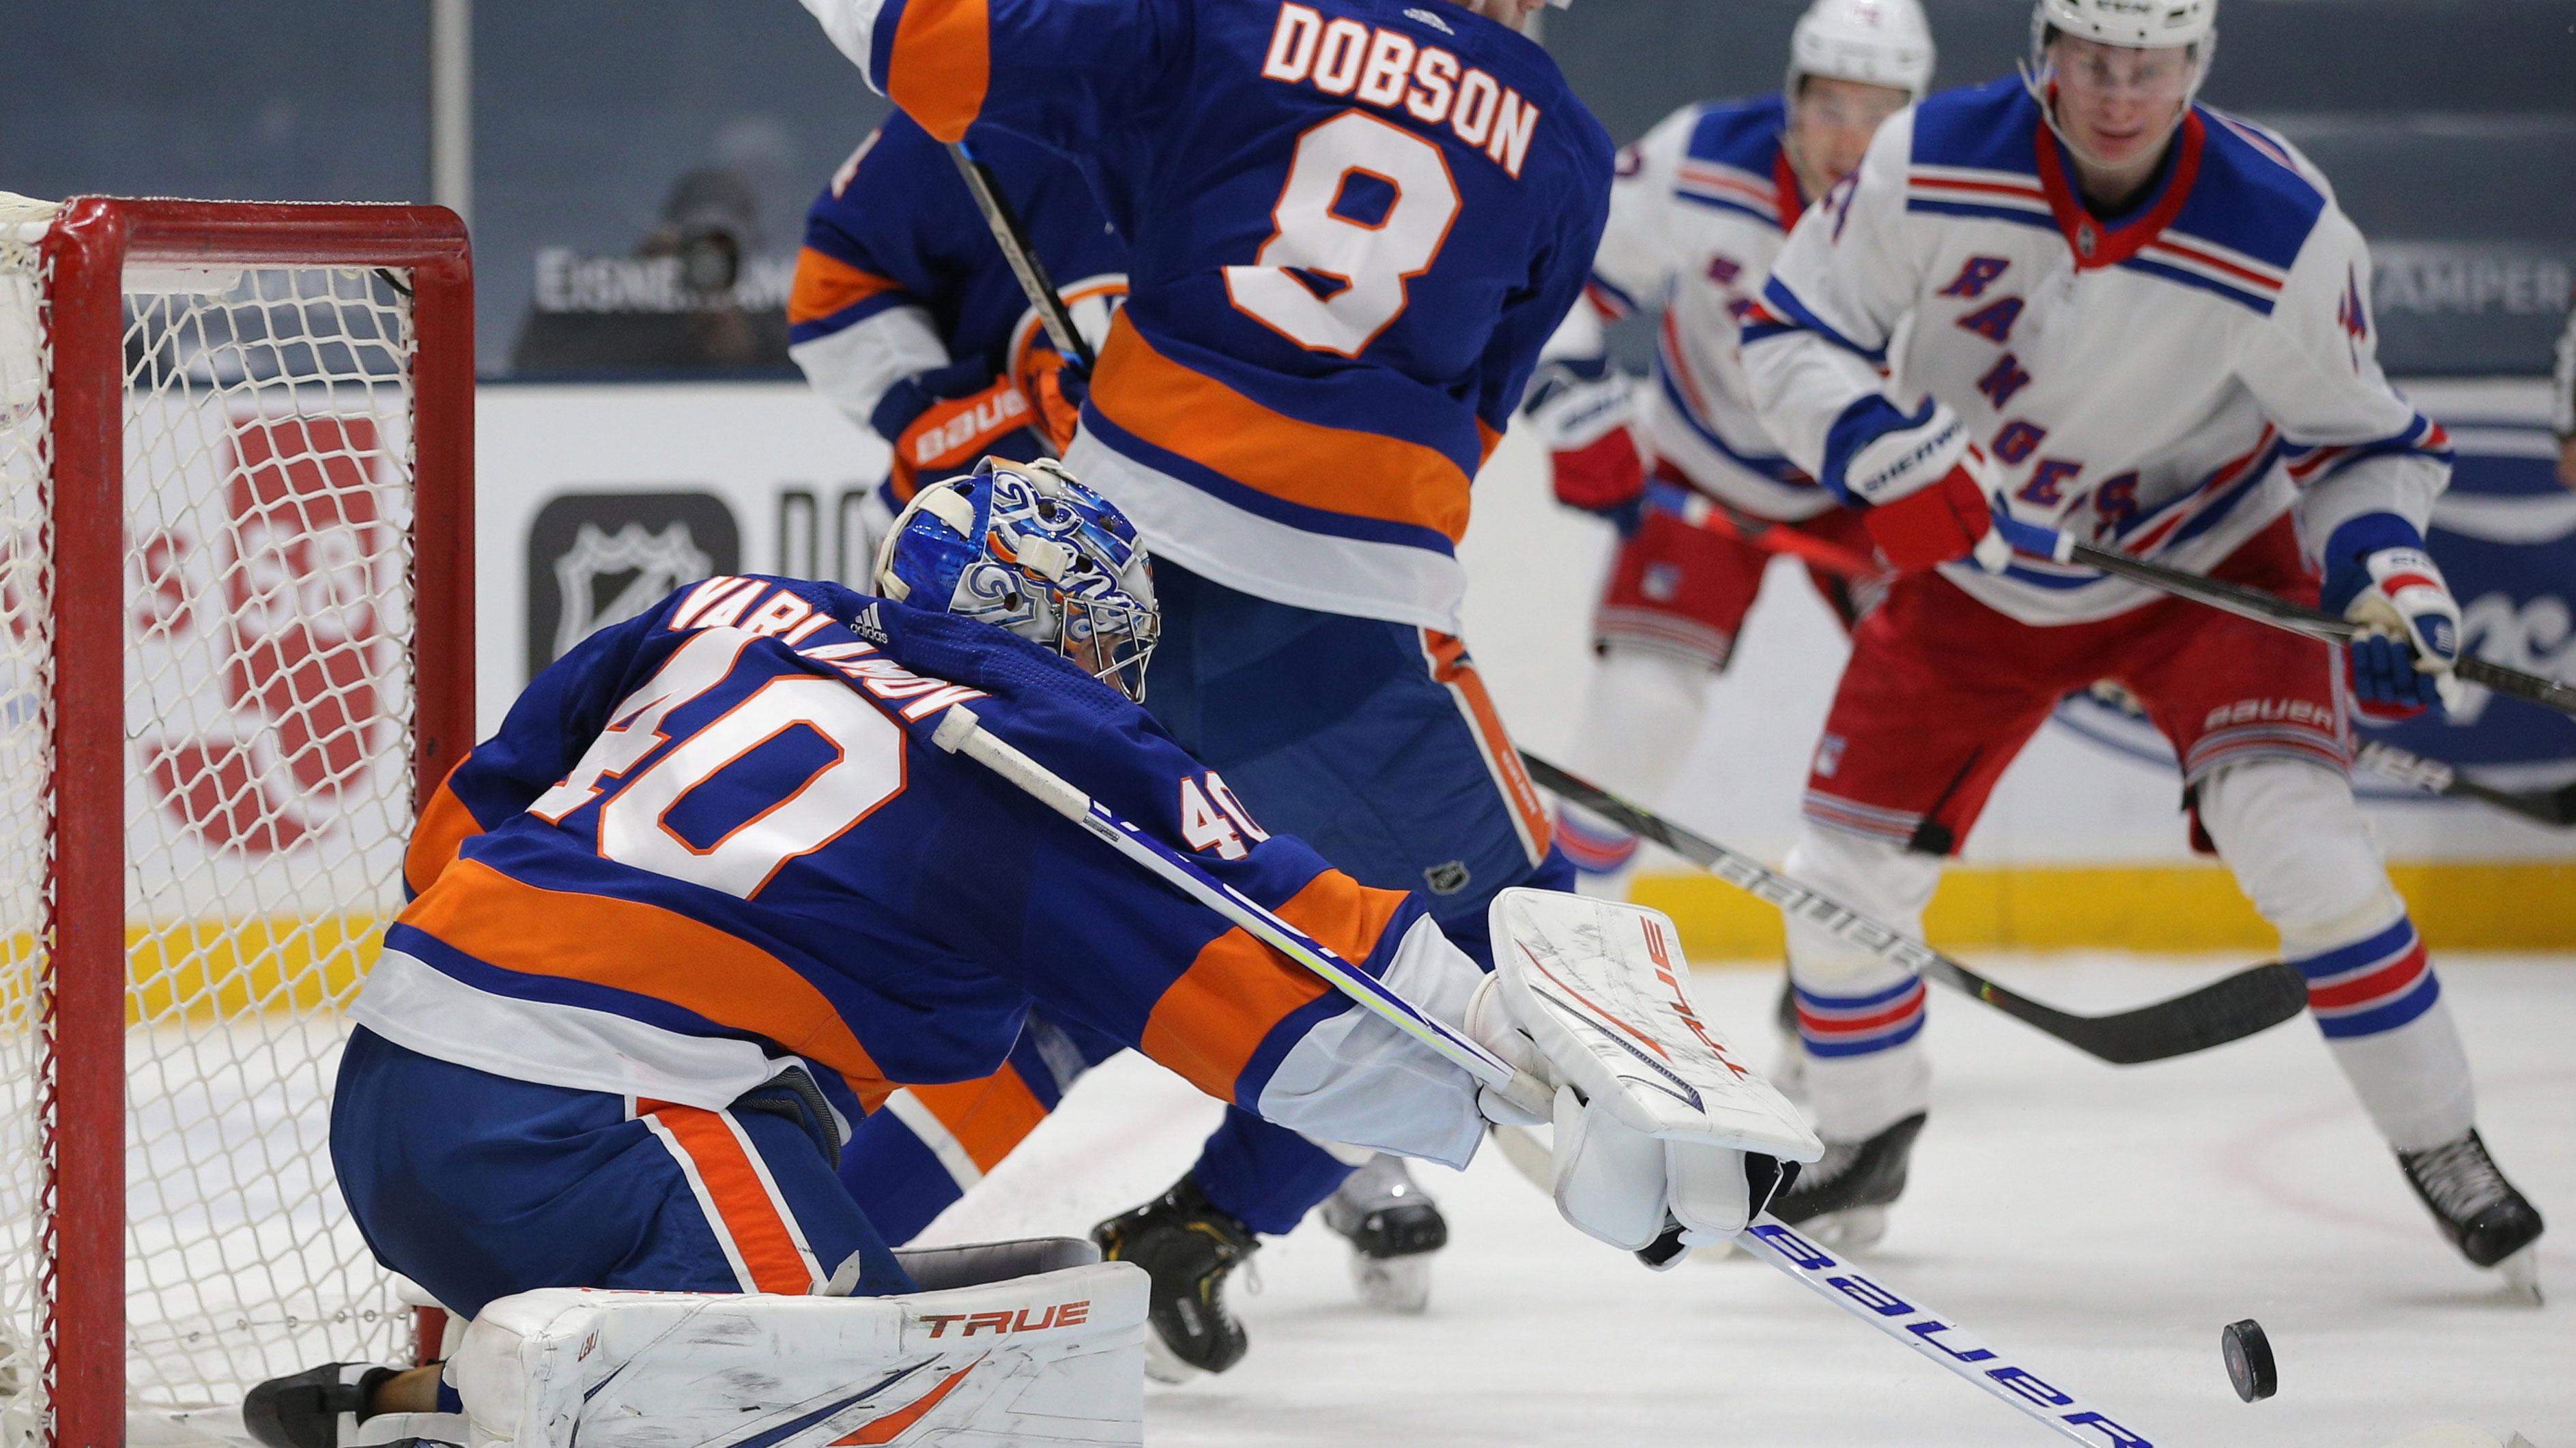 May 1, 2021; Uniondale, New York, USA; New York Islanders goalie Semyon Varlamov (40) plays the puck against the New York Rangers during the first period at Nassau Veterans Memorial Coliseum. / Brad Penner-USA TODAY Sports